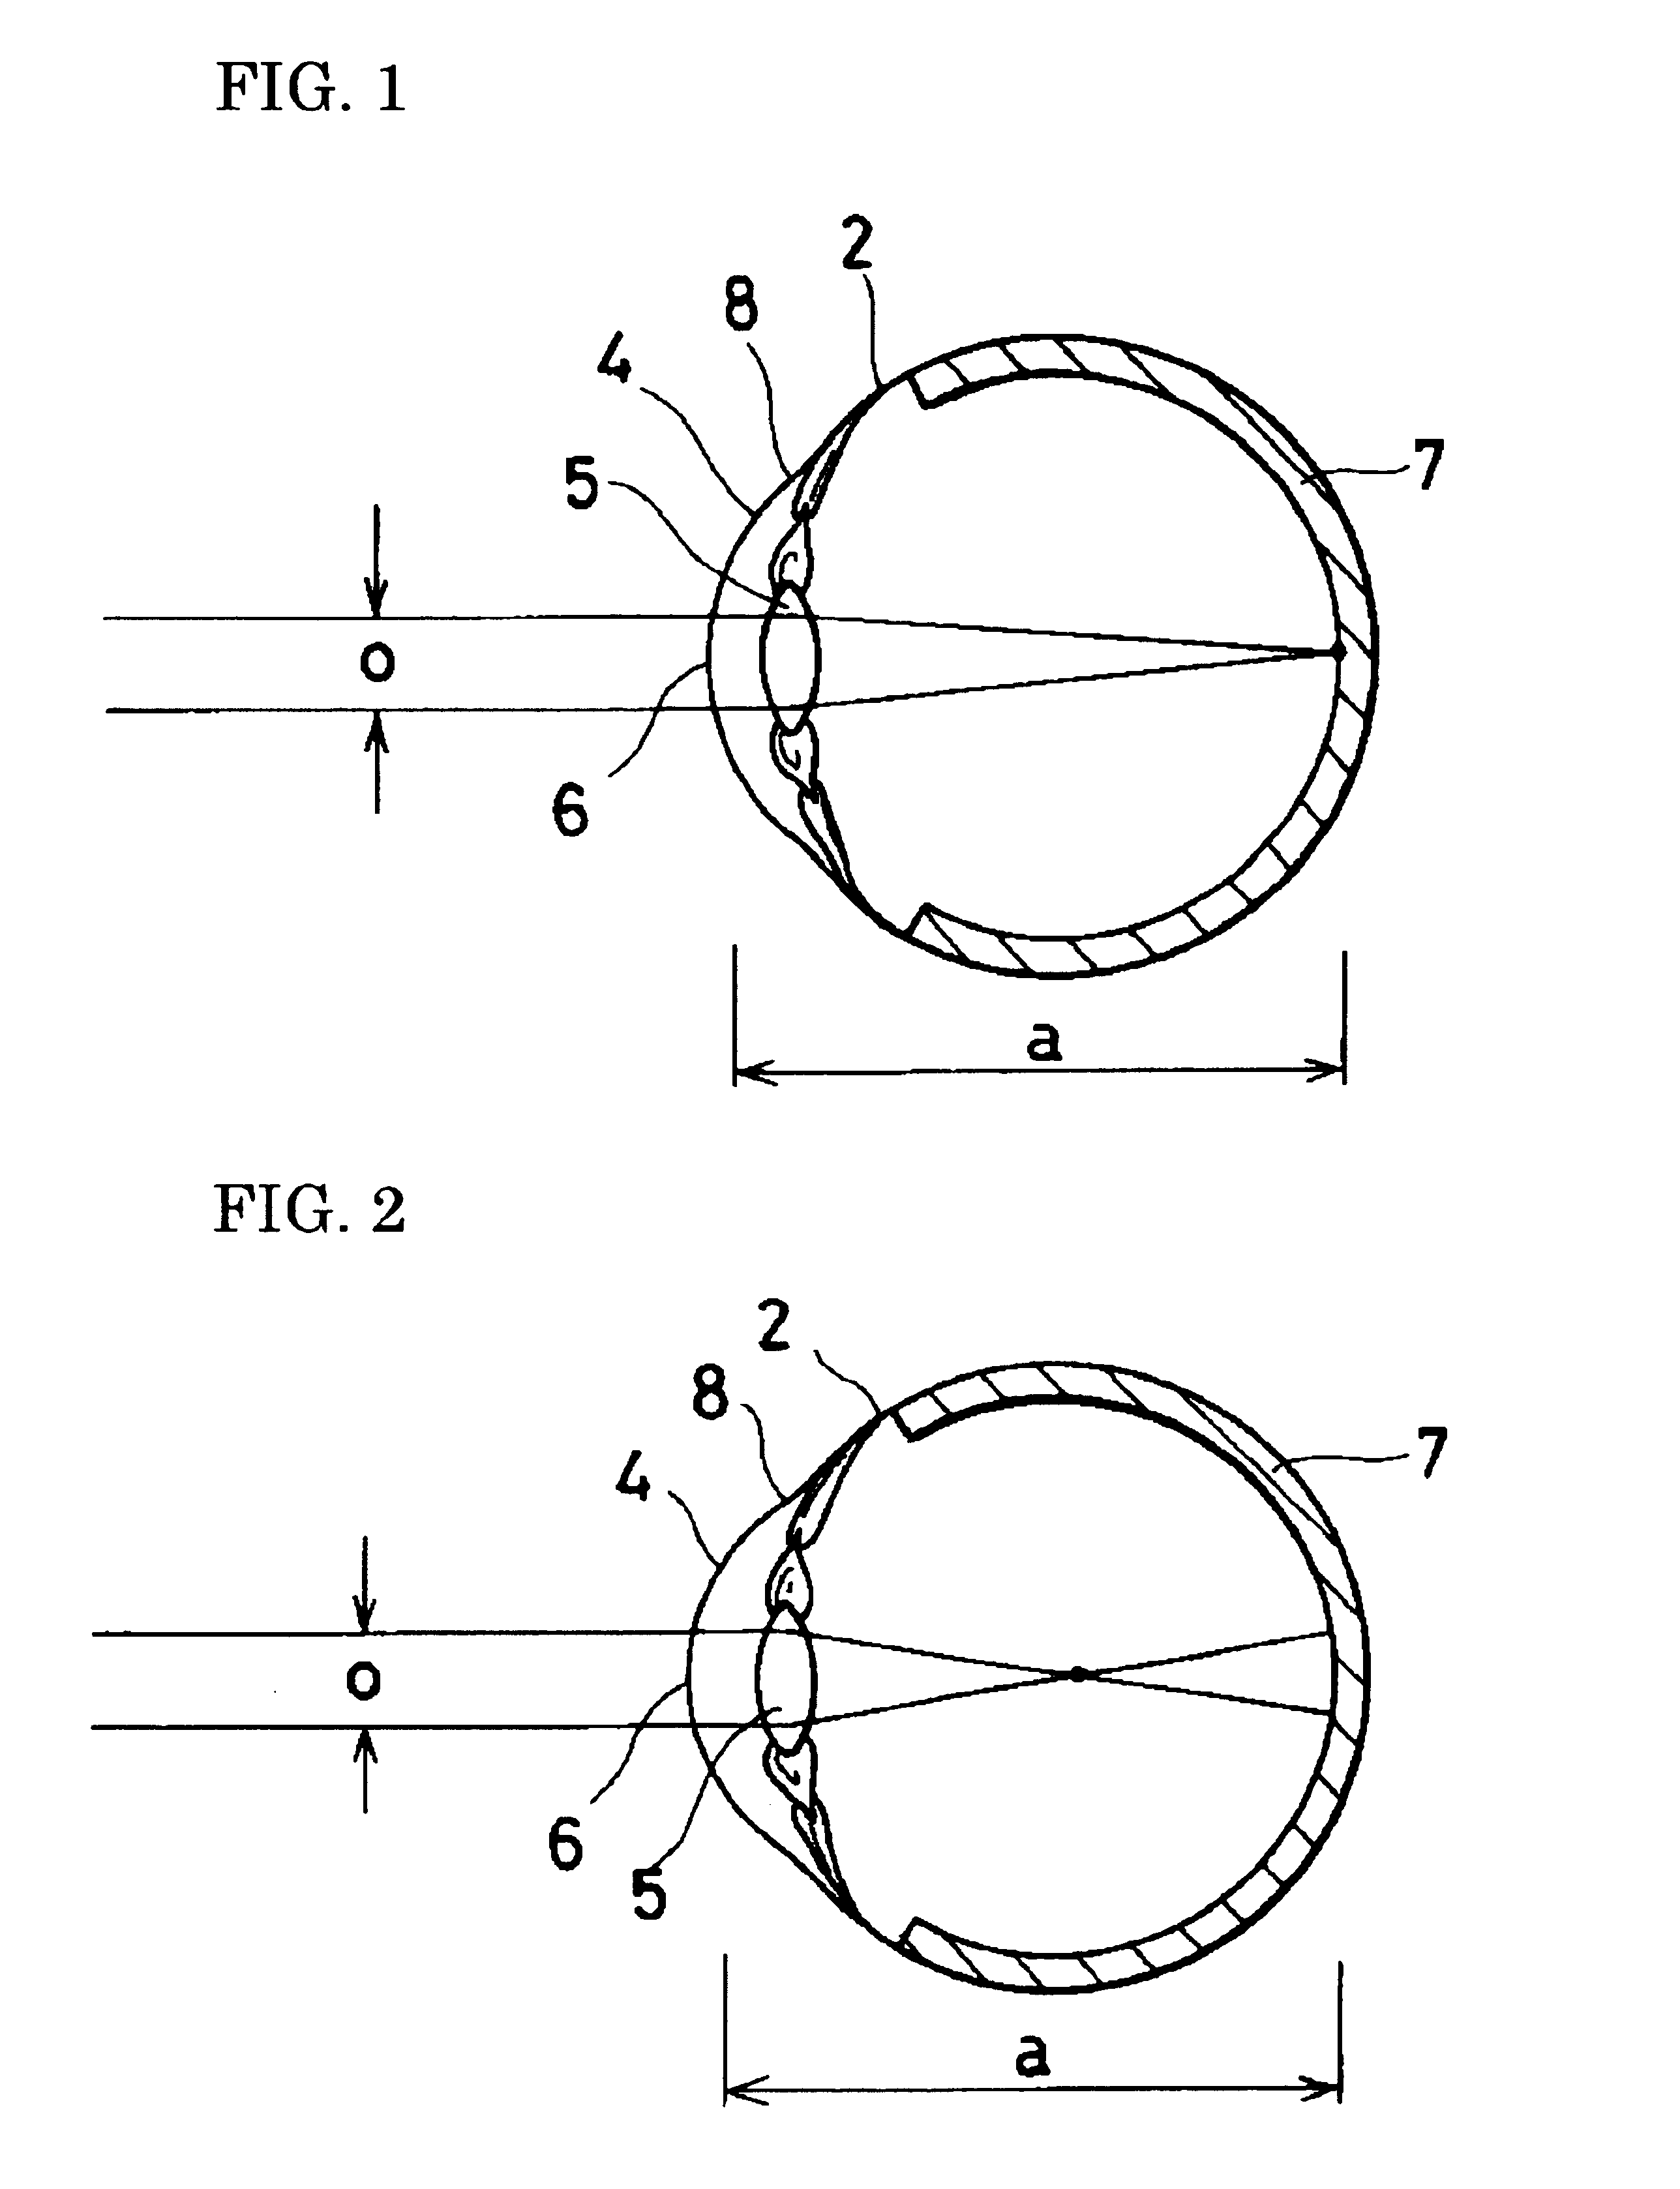 Contact lens for correcting myopia and/or astigmatism